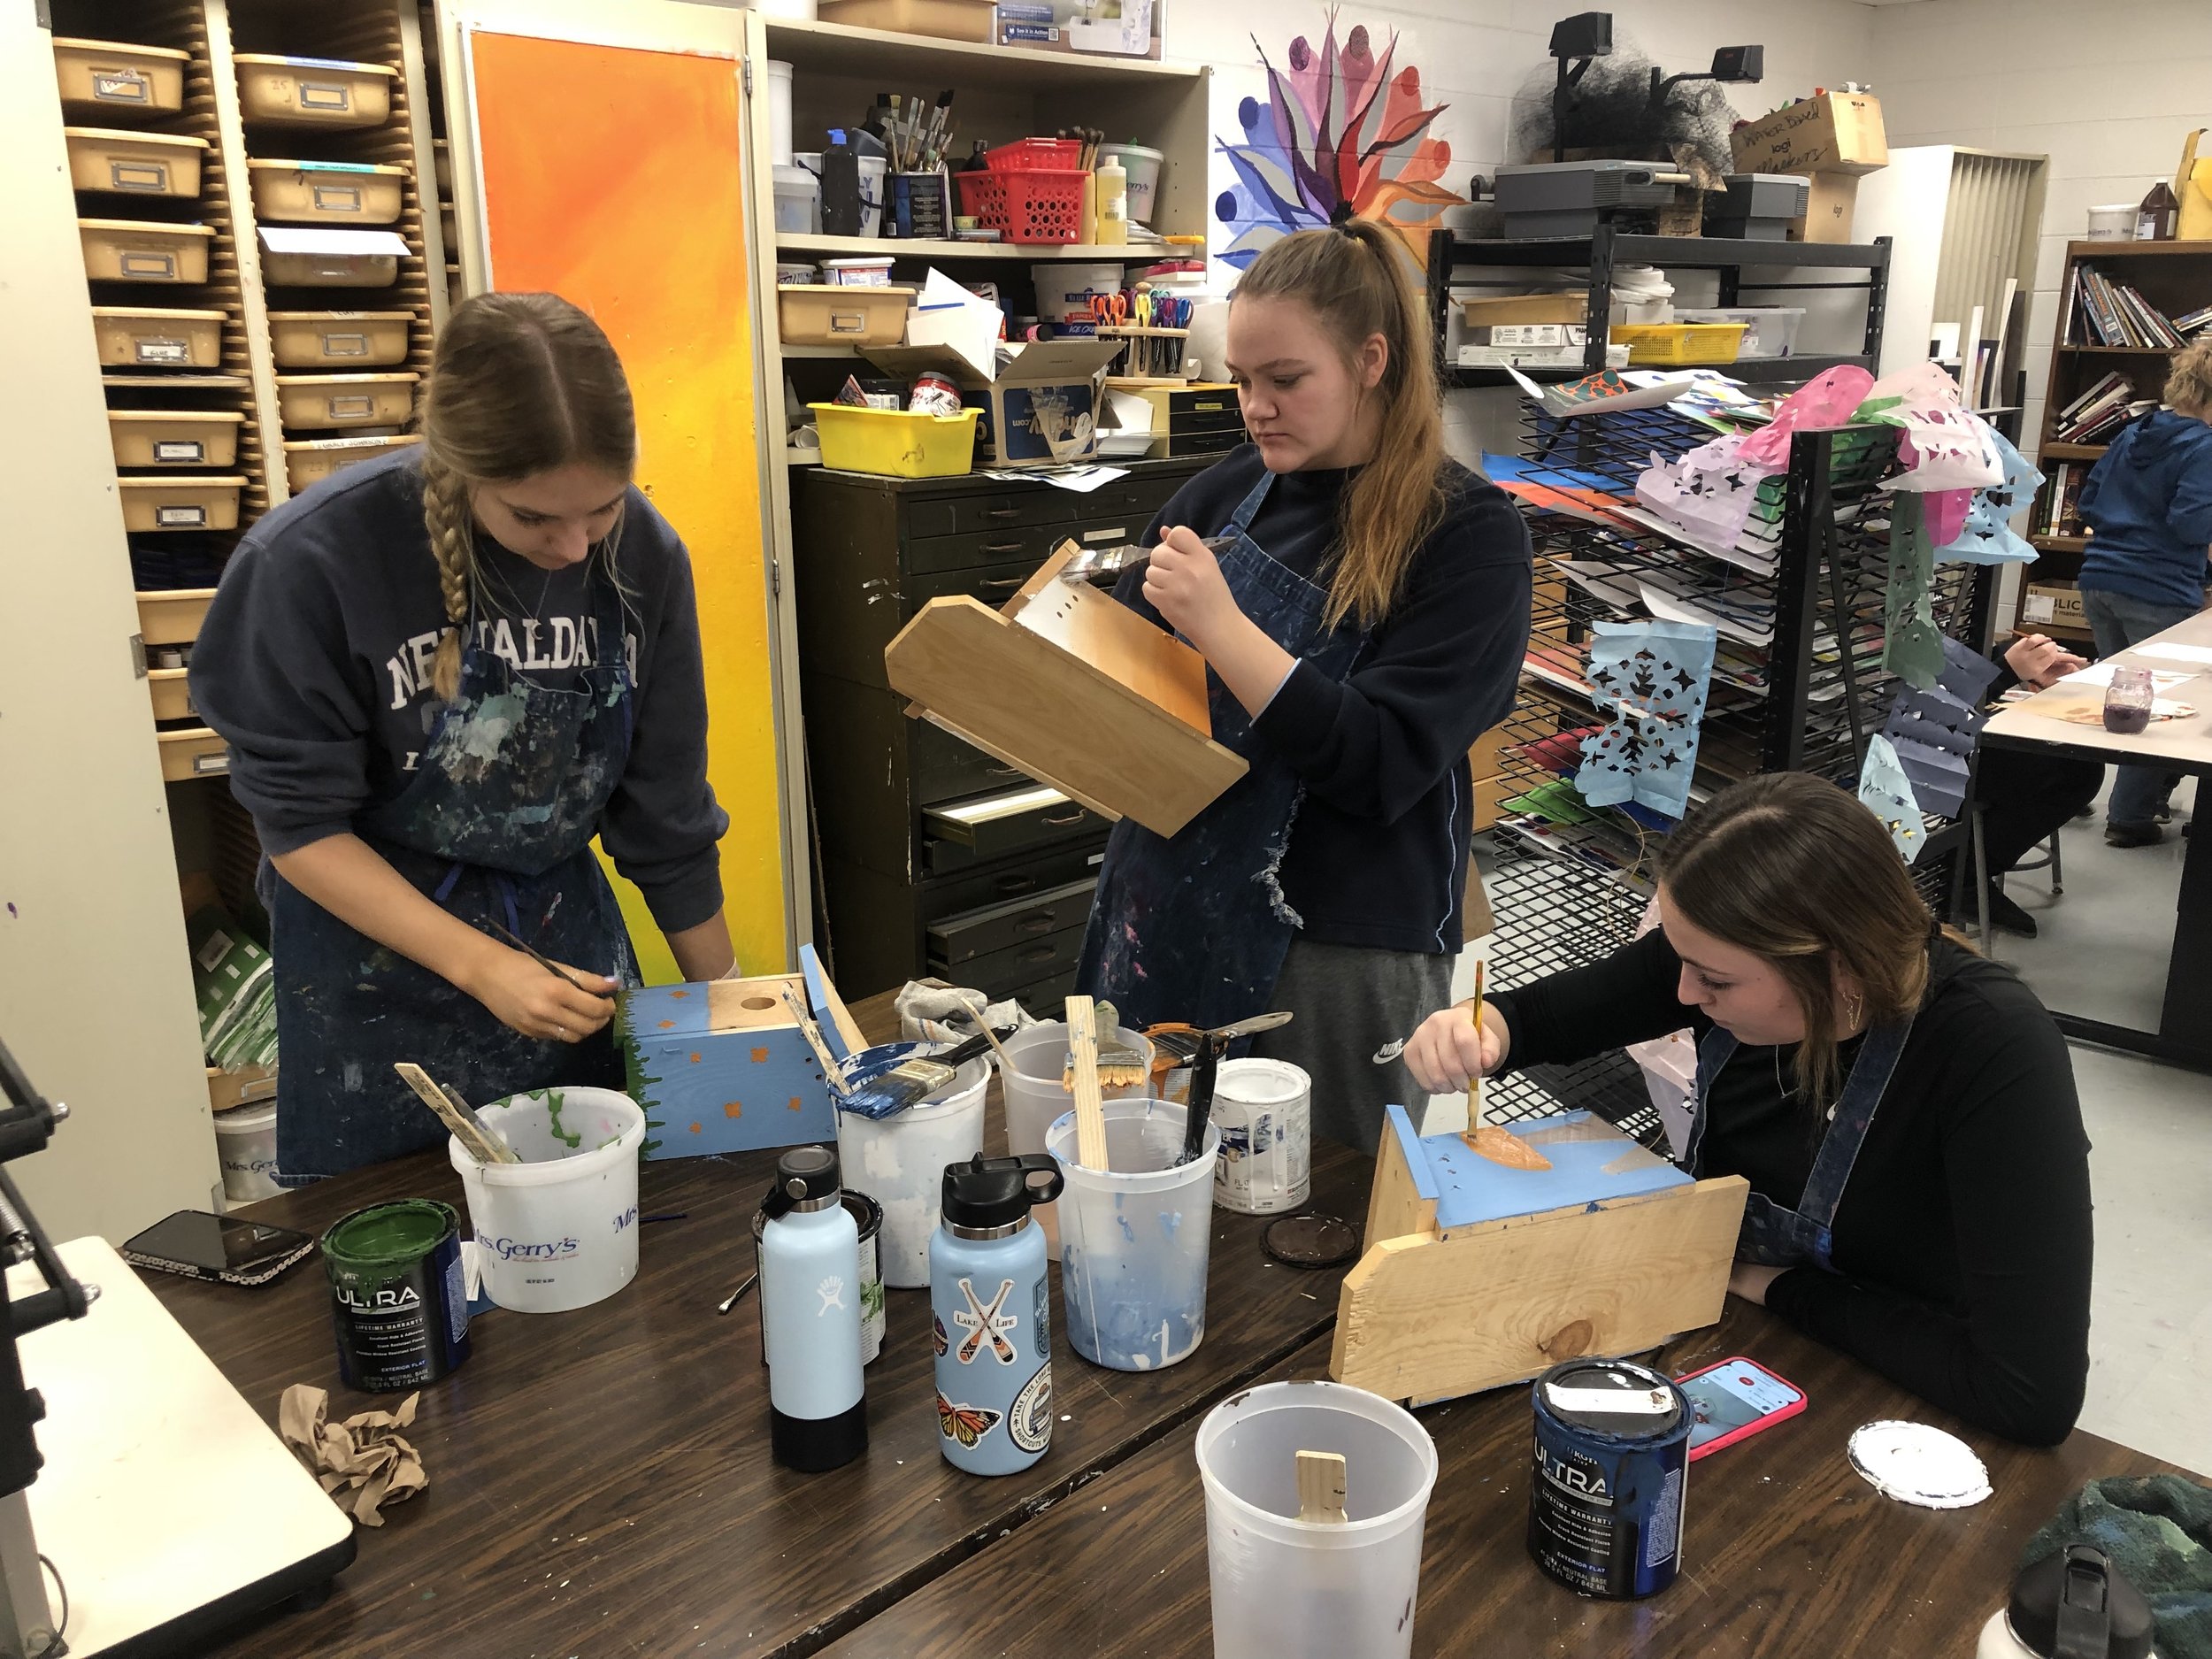 Senior students paint bluebird houses to be placed at Whiterock Conservancy, a local land trust of native oak savanna prairie.